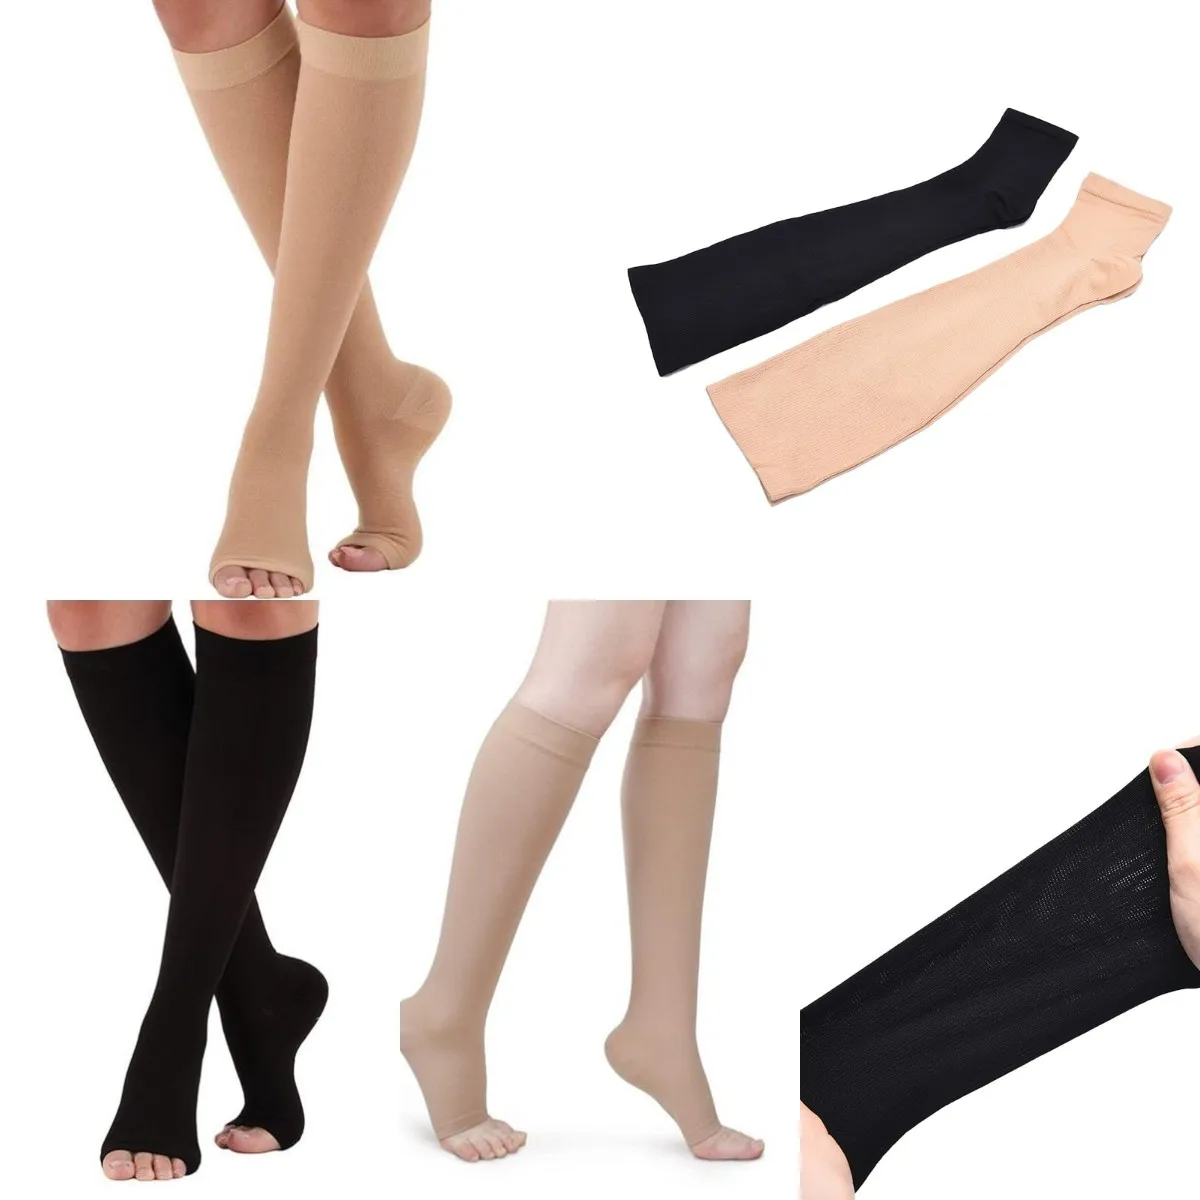 

S-XL Elastic Open Toe Knee High Stockings Varicose Veins Treat Shaping Graduated Pressure Stockings Calf Compression Stockings